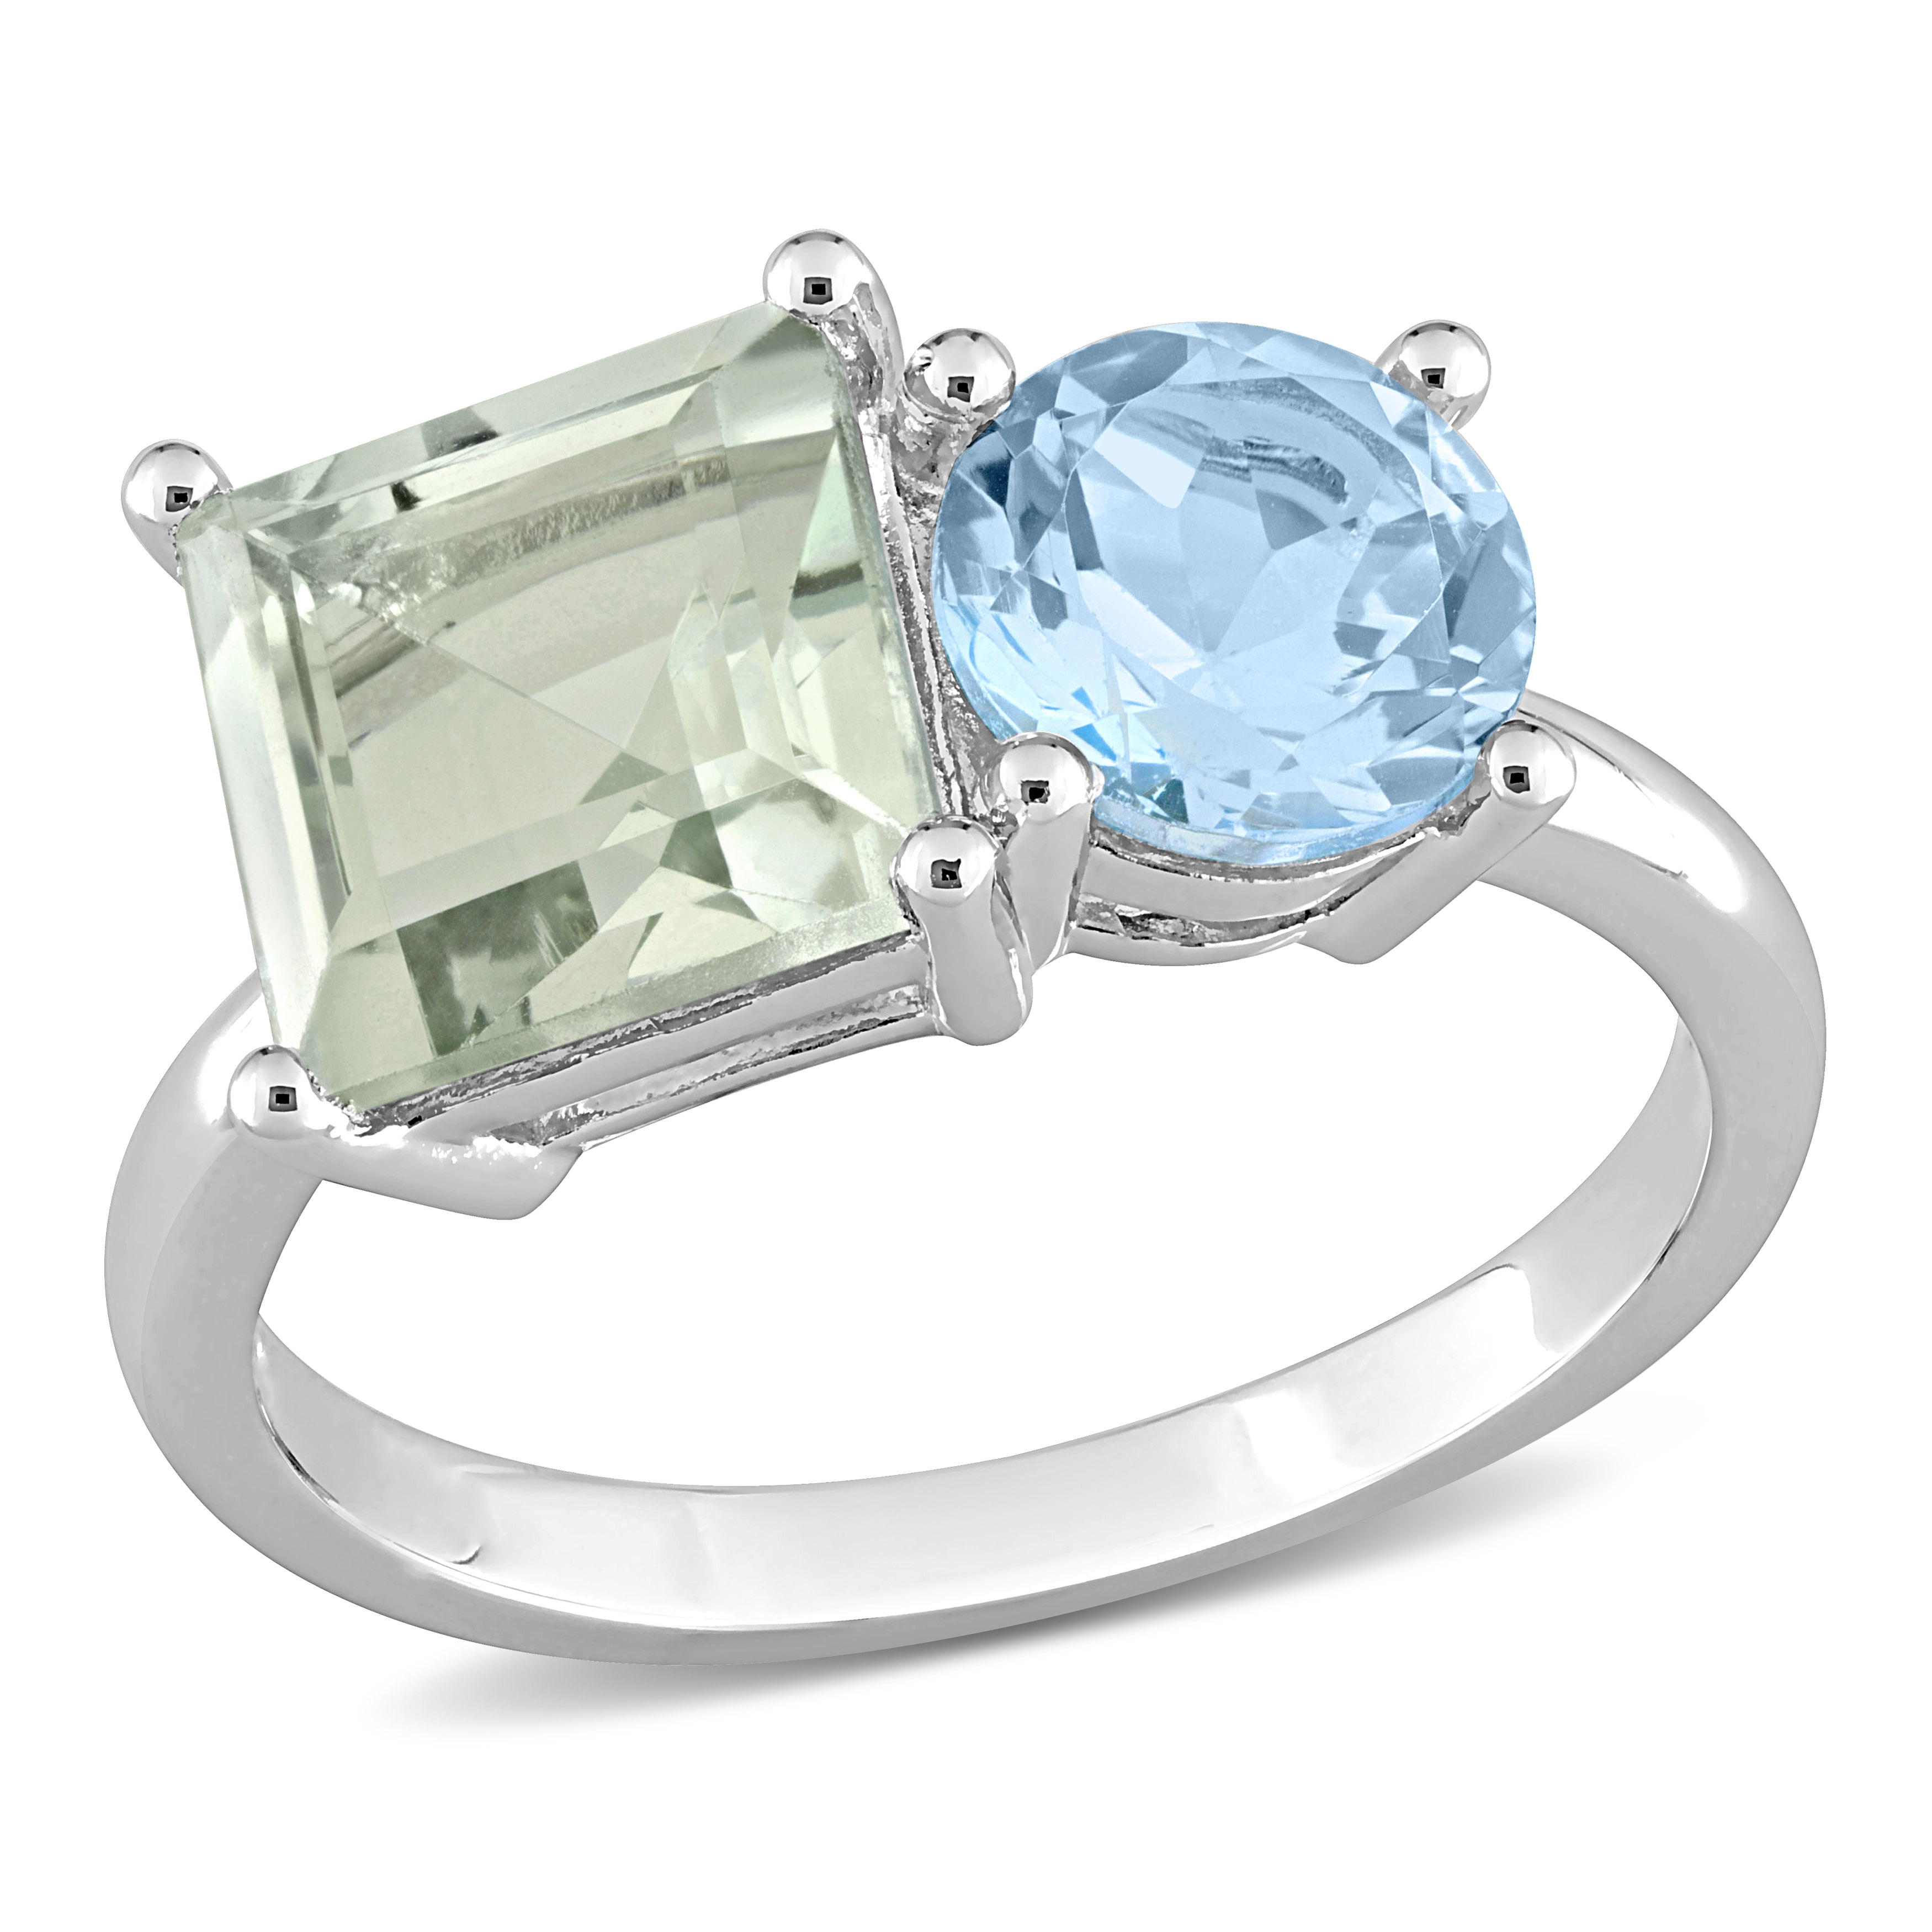 3 4/5 CT TGW Octagon Green Quartz and Sky Blue Topaz Ring in Sterling Silver